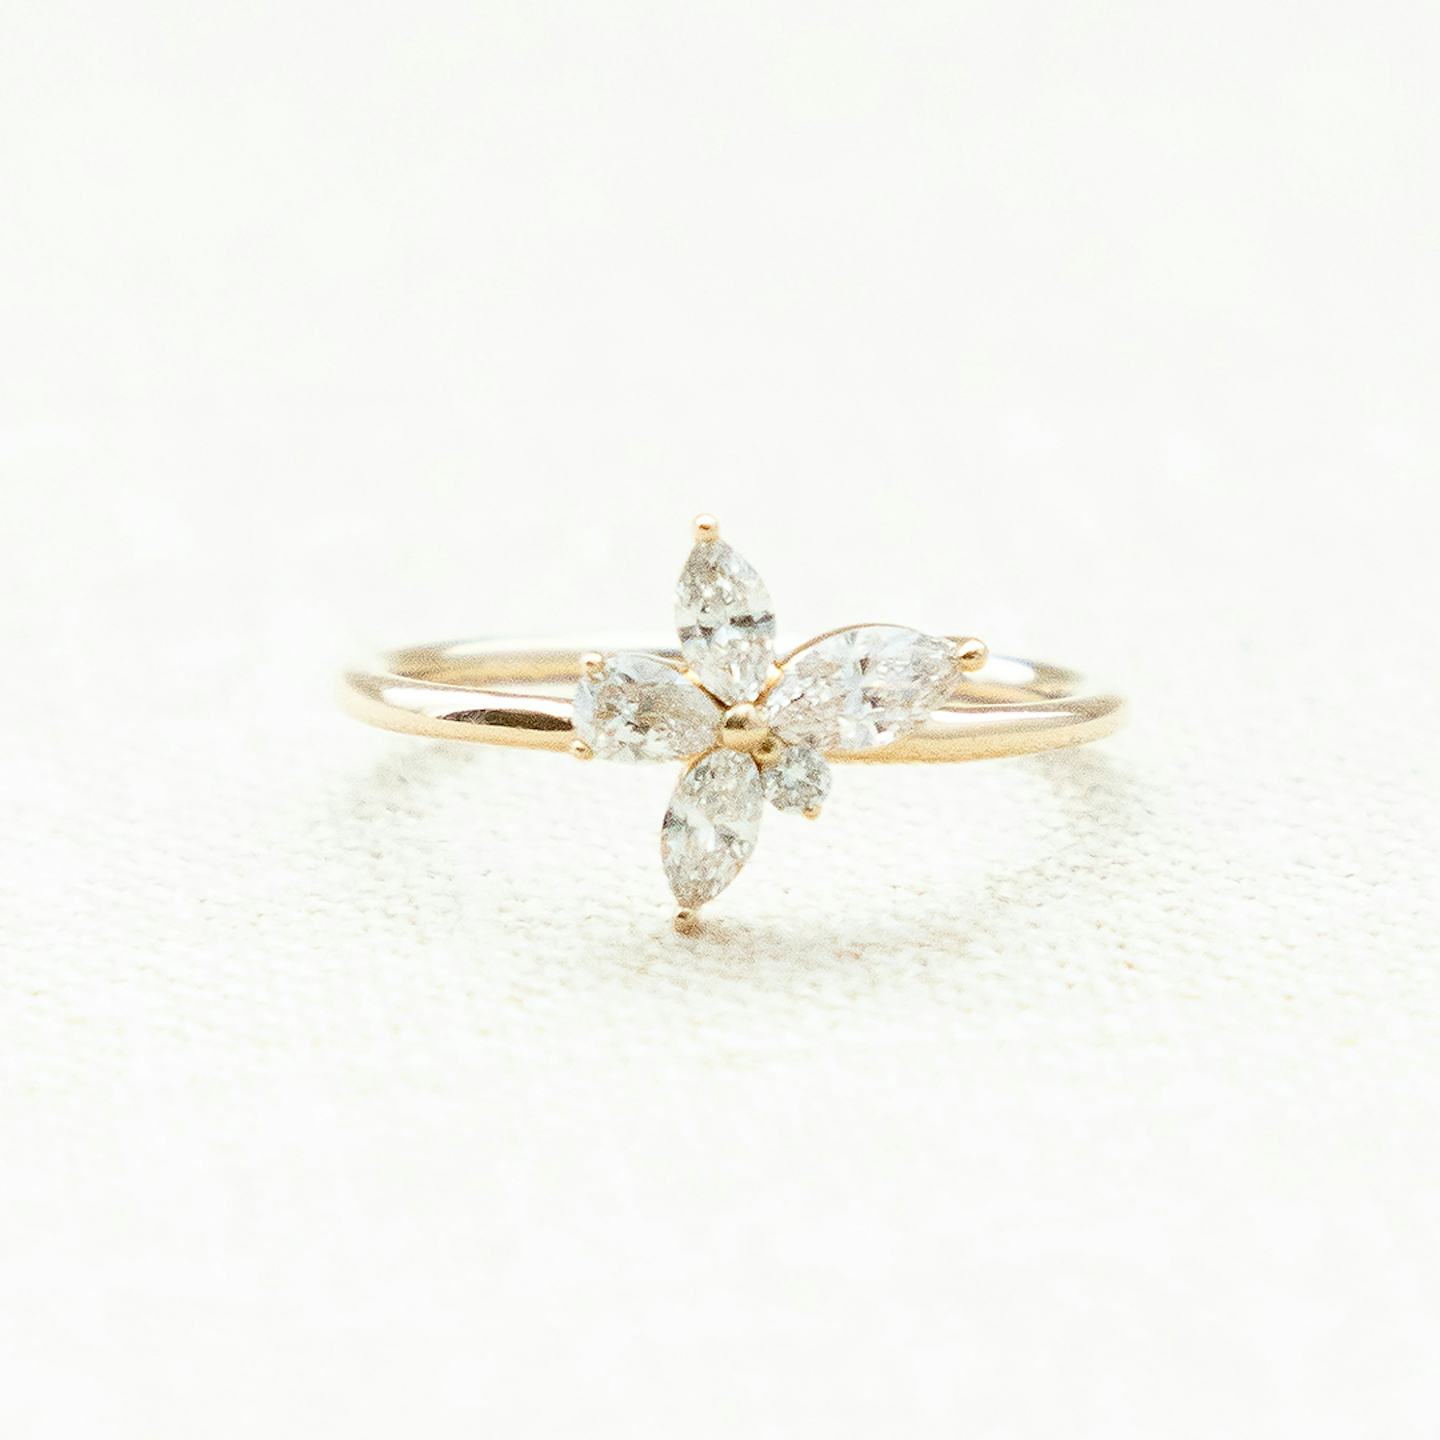 Bague Perennial | round-brilliant+pear+marquise | 14k | Or jaune 18 carats